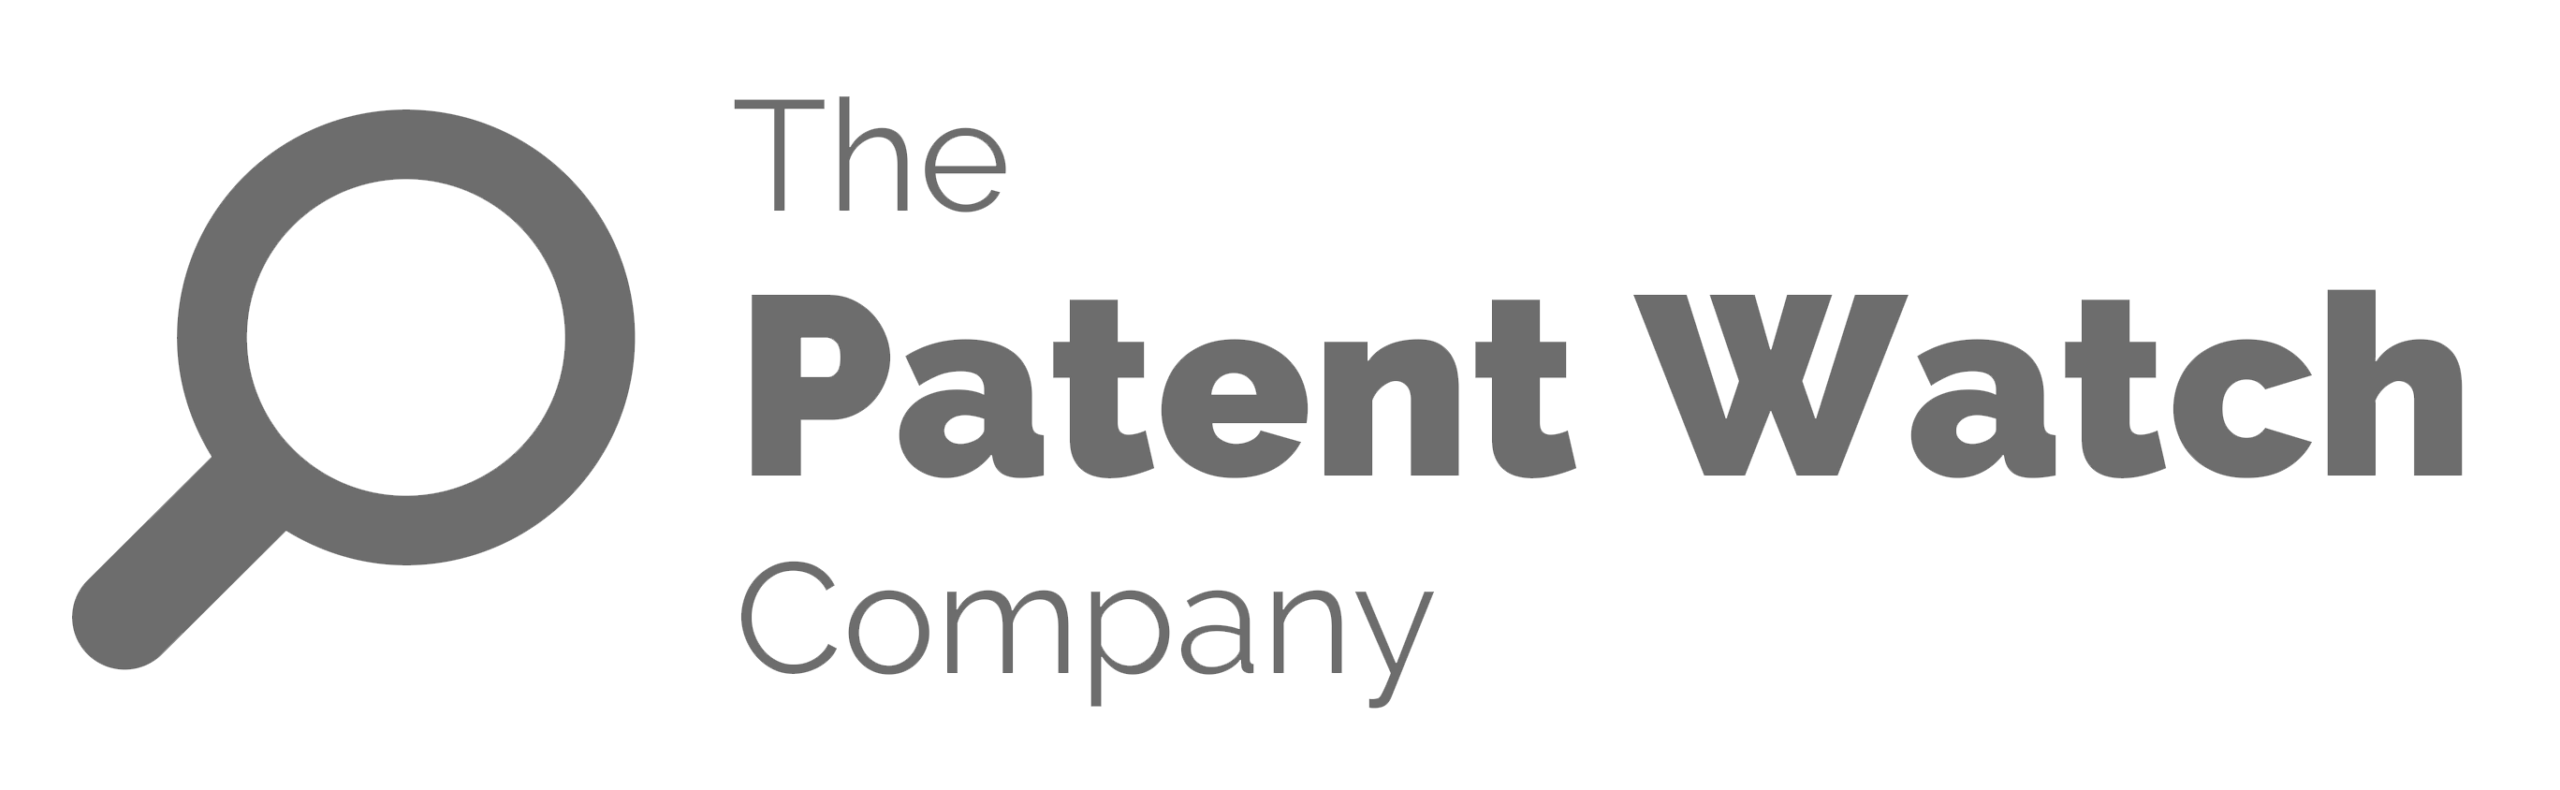 The Patent Watch Company